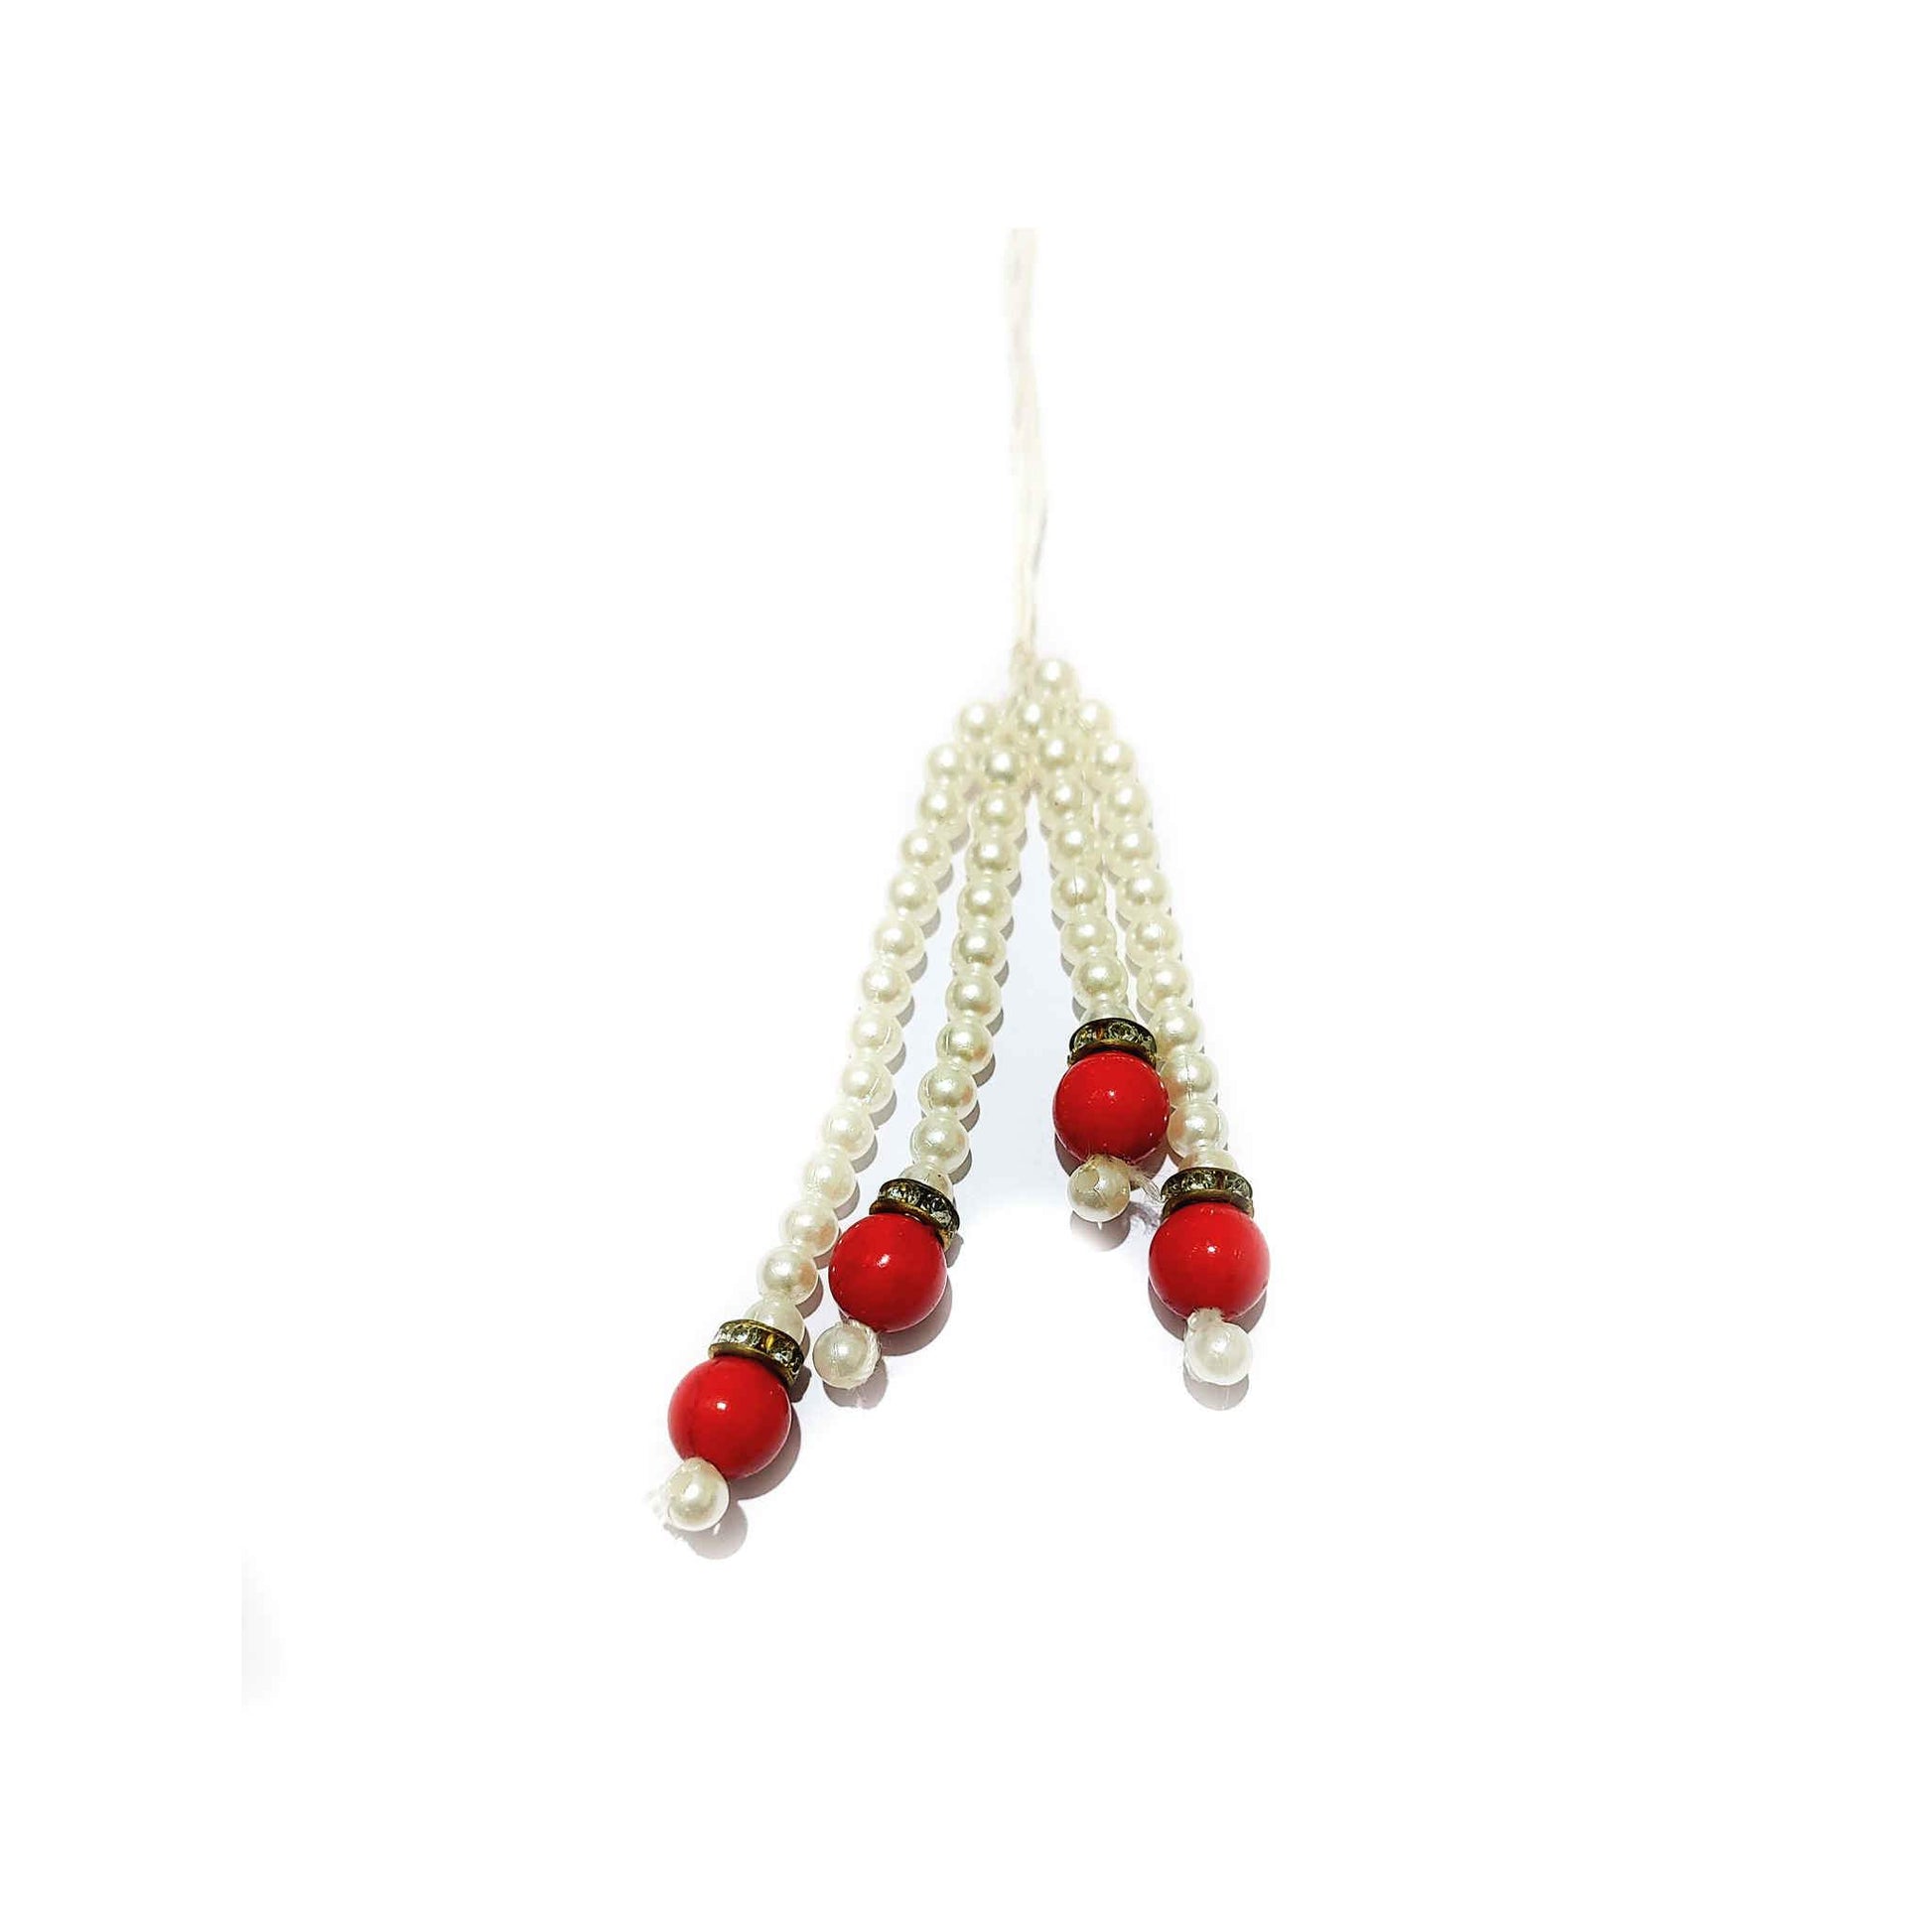 Indian Petals Small Pearl Beads with Red Bead and Diamond Ring Handmade DIY Craft, Jewelry Tassel - Design 818